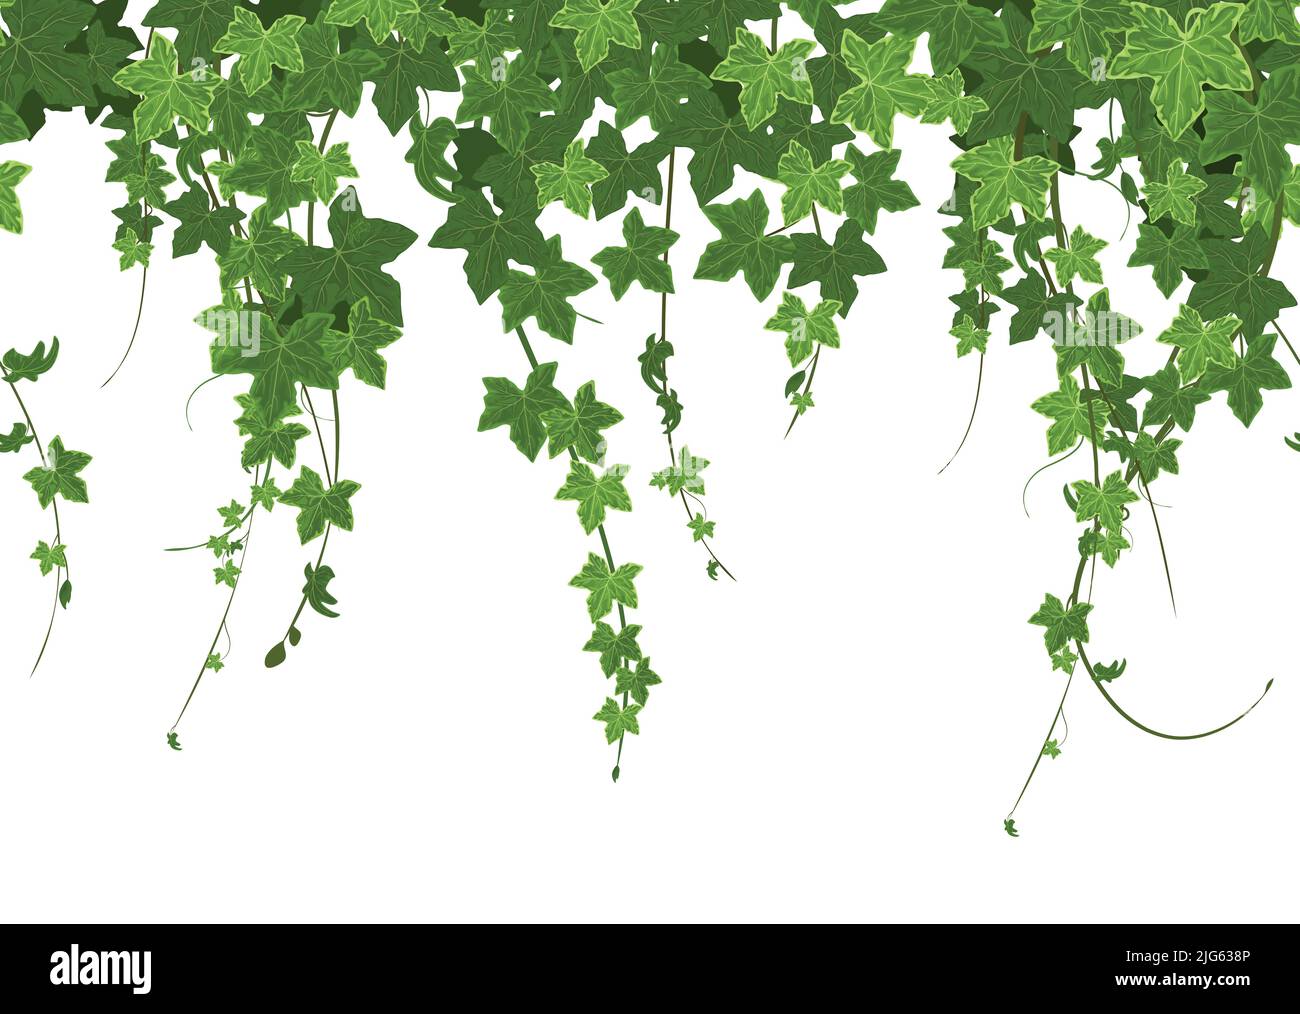 Ivy climbing plant border seamless composition with row of ripe leaves with verdant hedge and greenery vector illustration Stock Vector